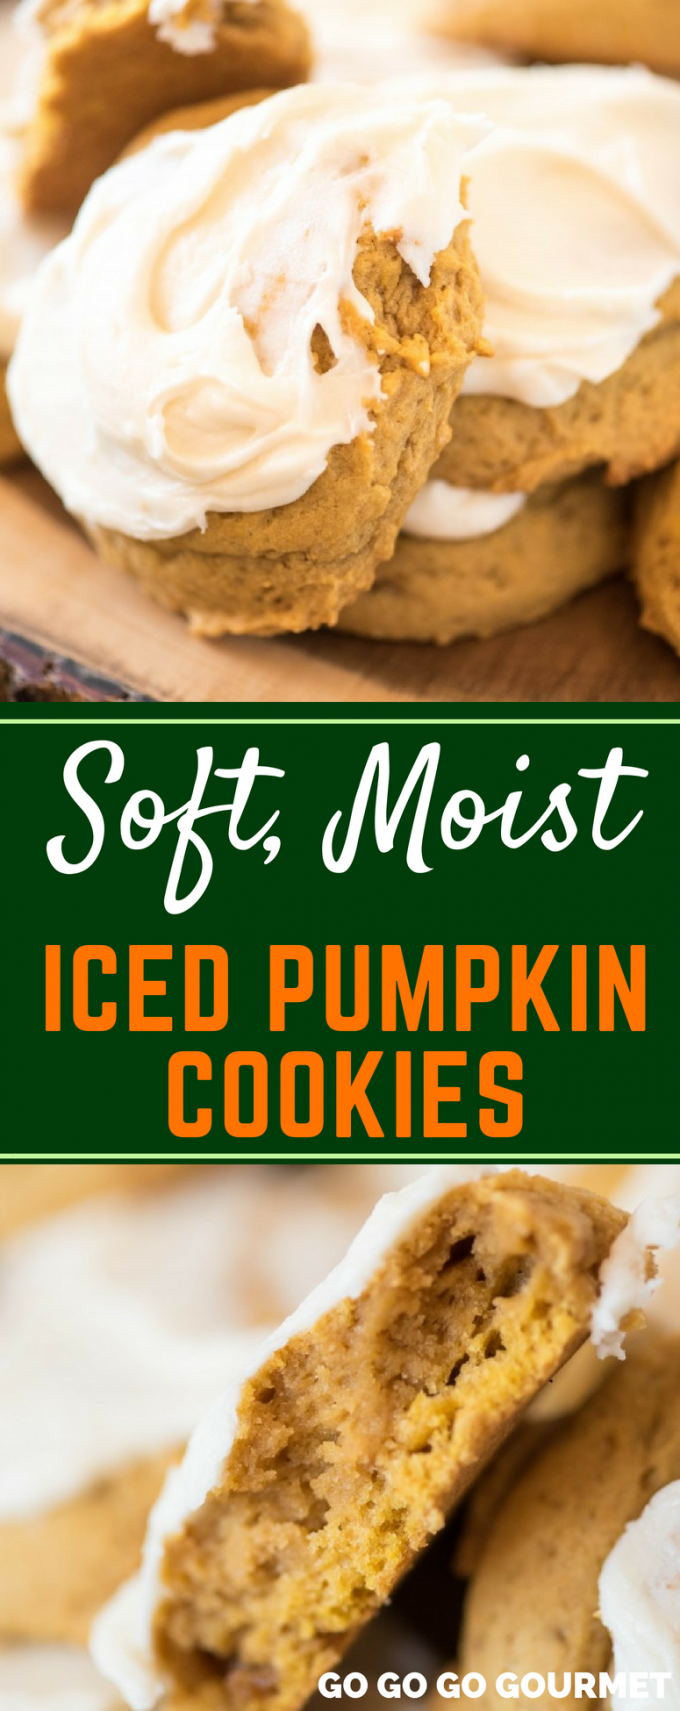 These Soft Iced Pumpkin Cookies are so easy and delicious! Perfectly chewy with all the flavors of fall, they really are the best! You could even add some chocolate chips for some extra flavor! #pumpkinrecipes #falldessertrecipes #softicedpumpkincookies #gogogogourmet via @gogogogourmet